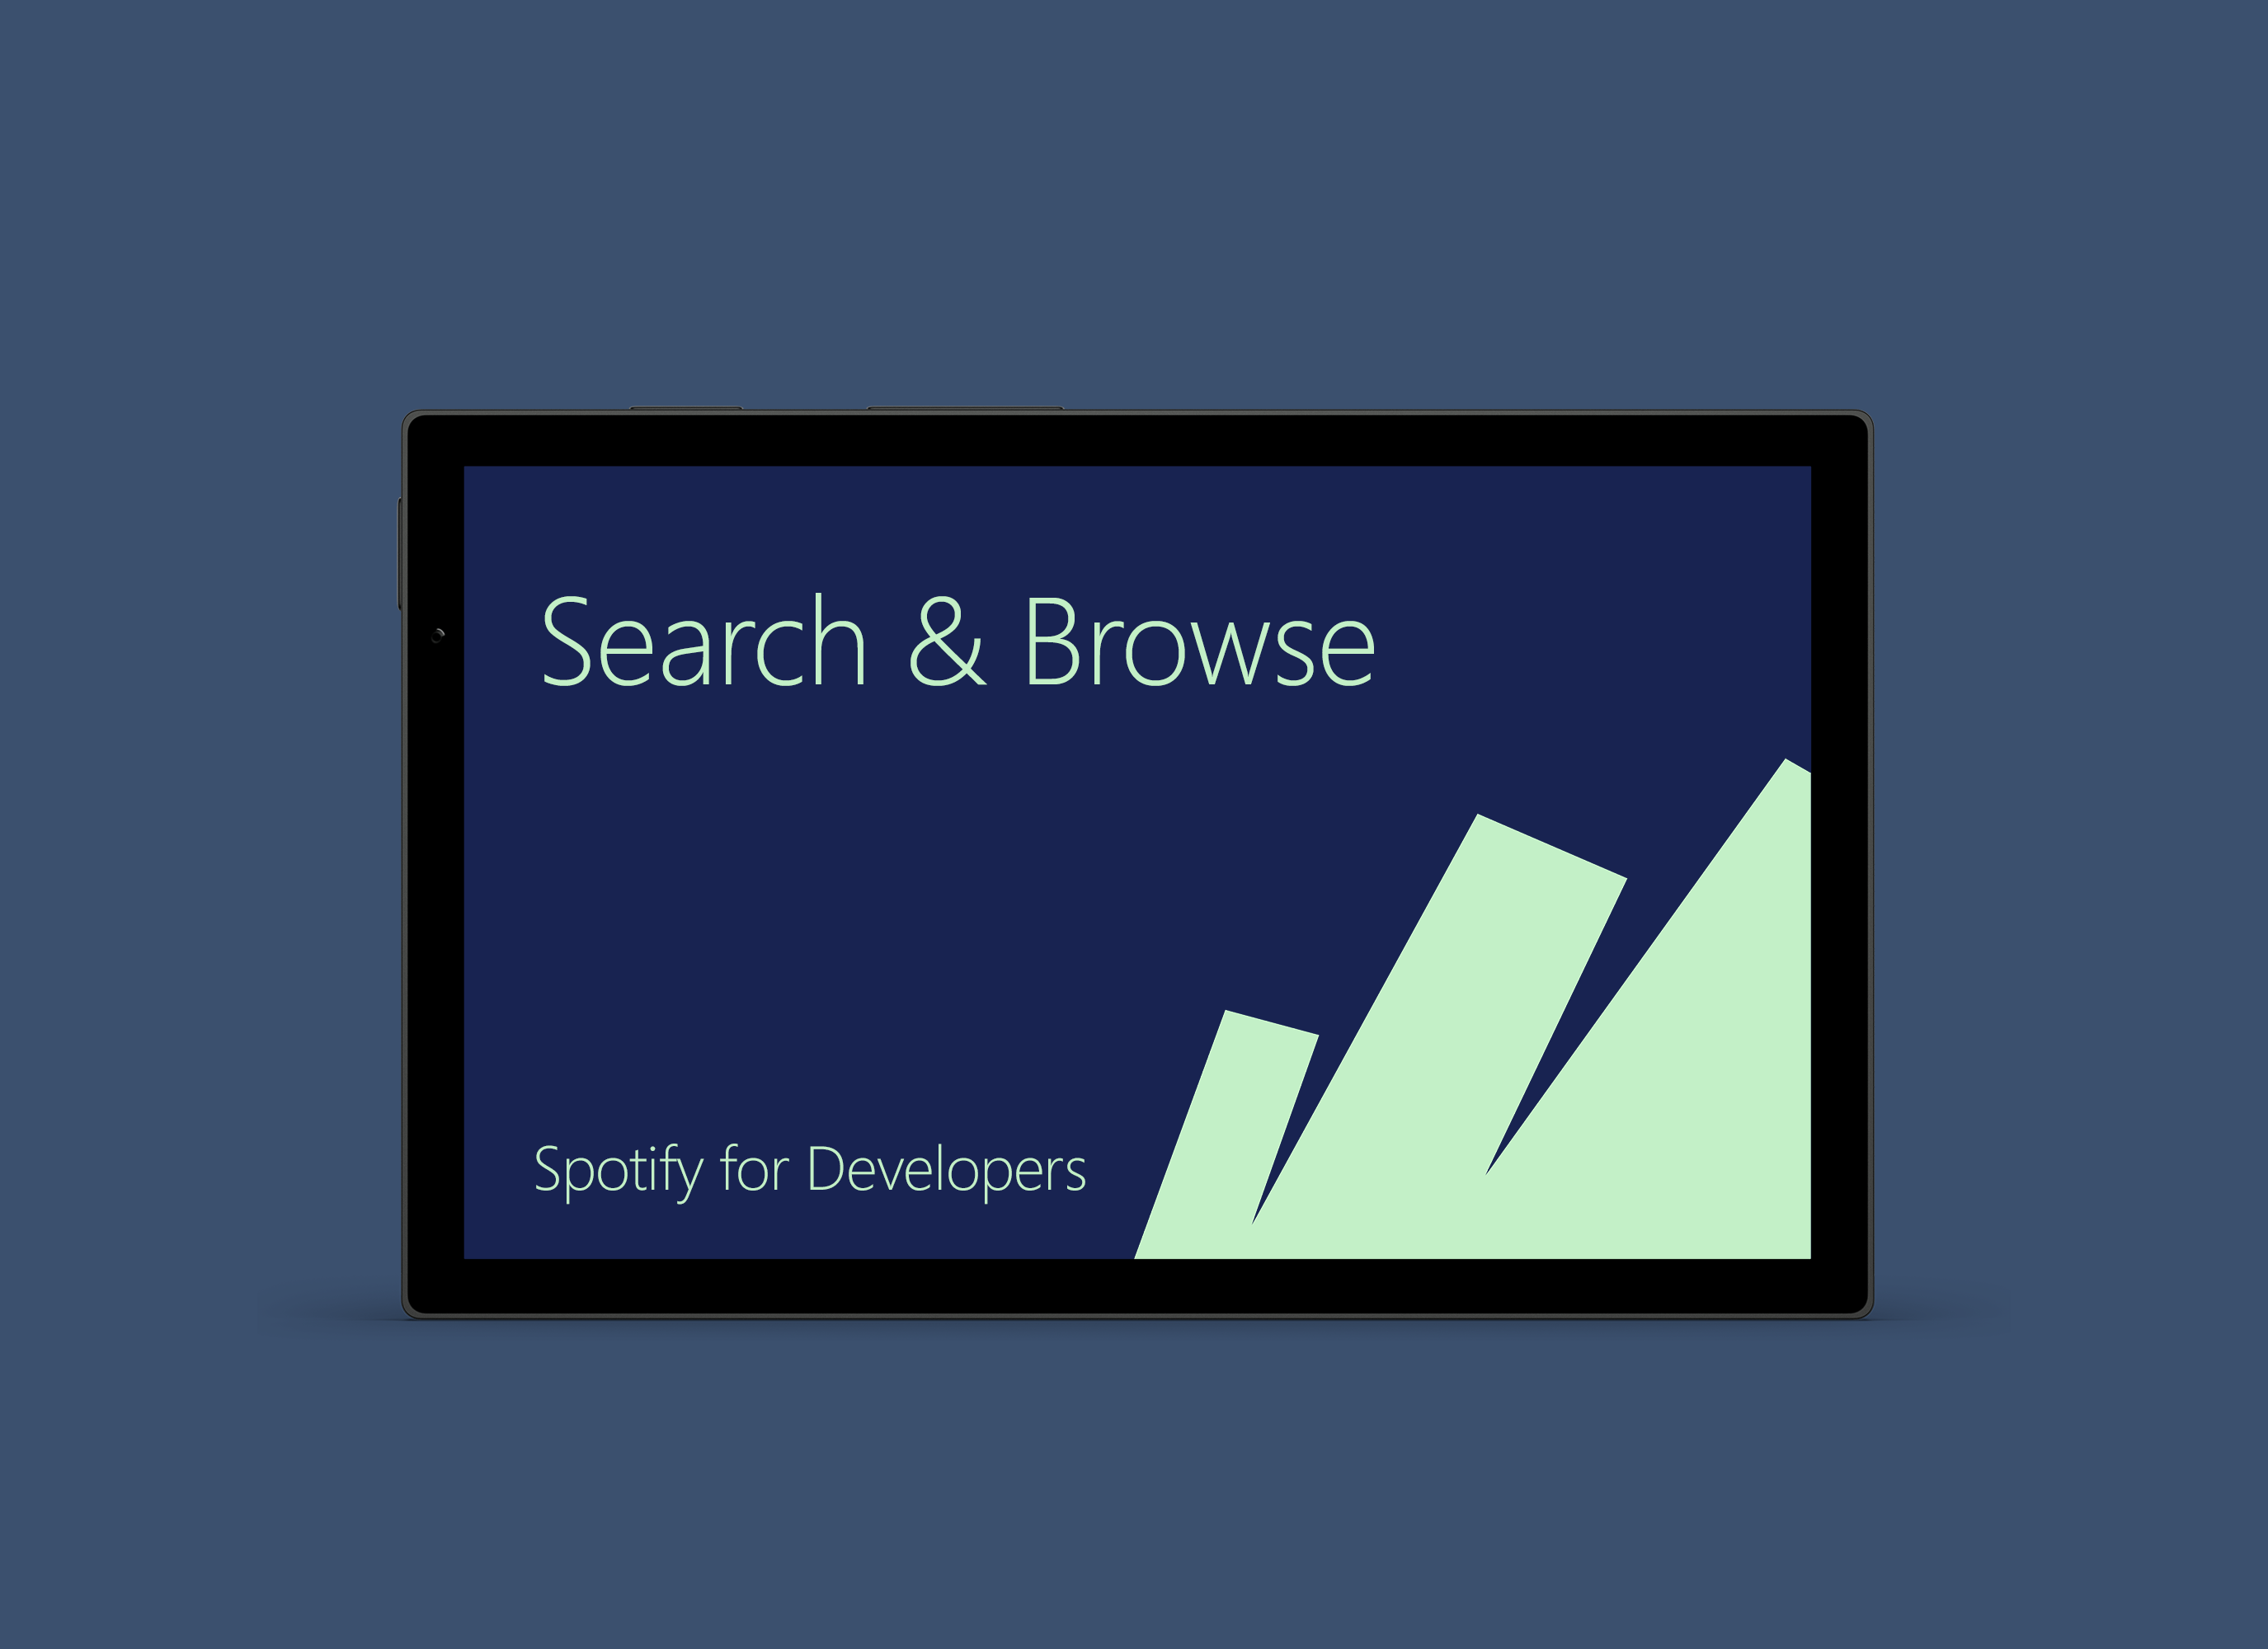 Search & Browse